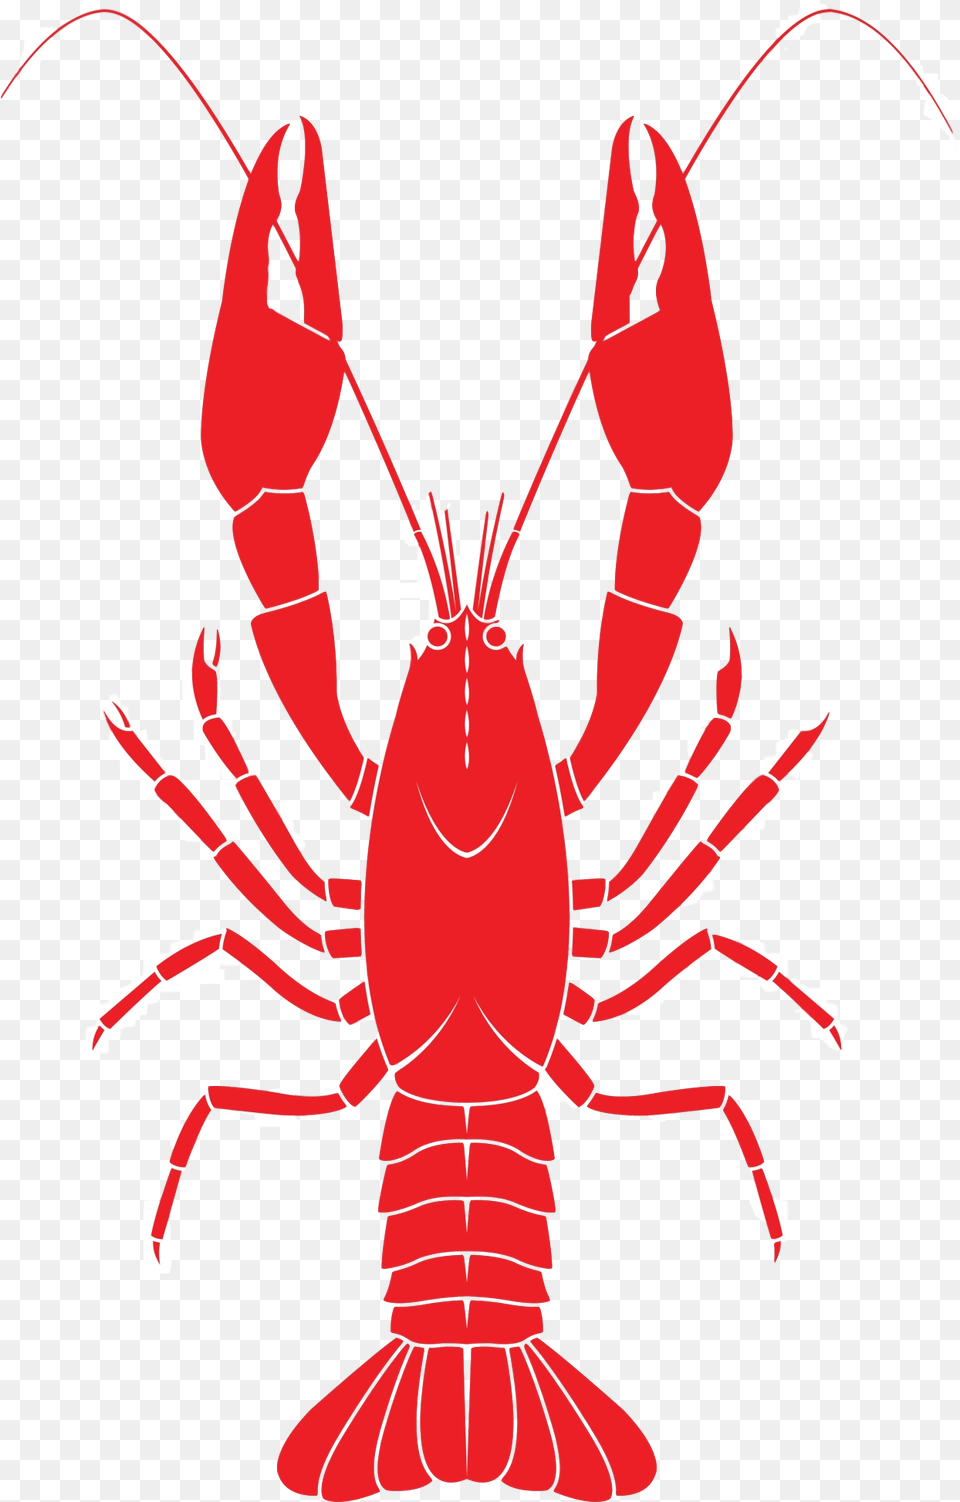 Lobster For Taiapure Vector Crawfish Clip Art, Food, Seafood, Animal, Sea Life Png Image